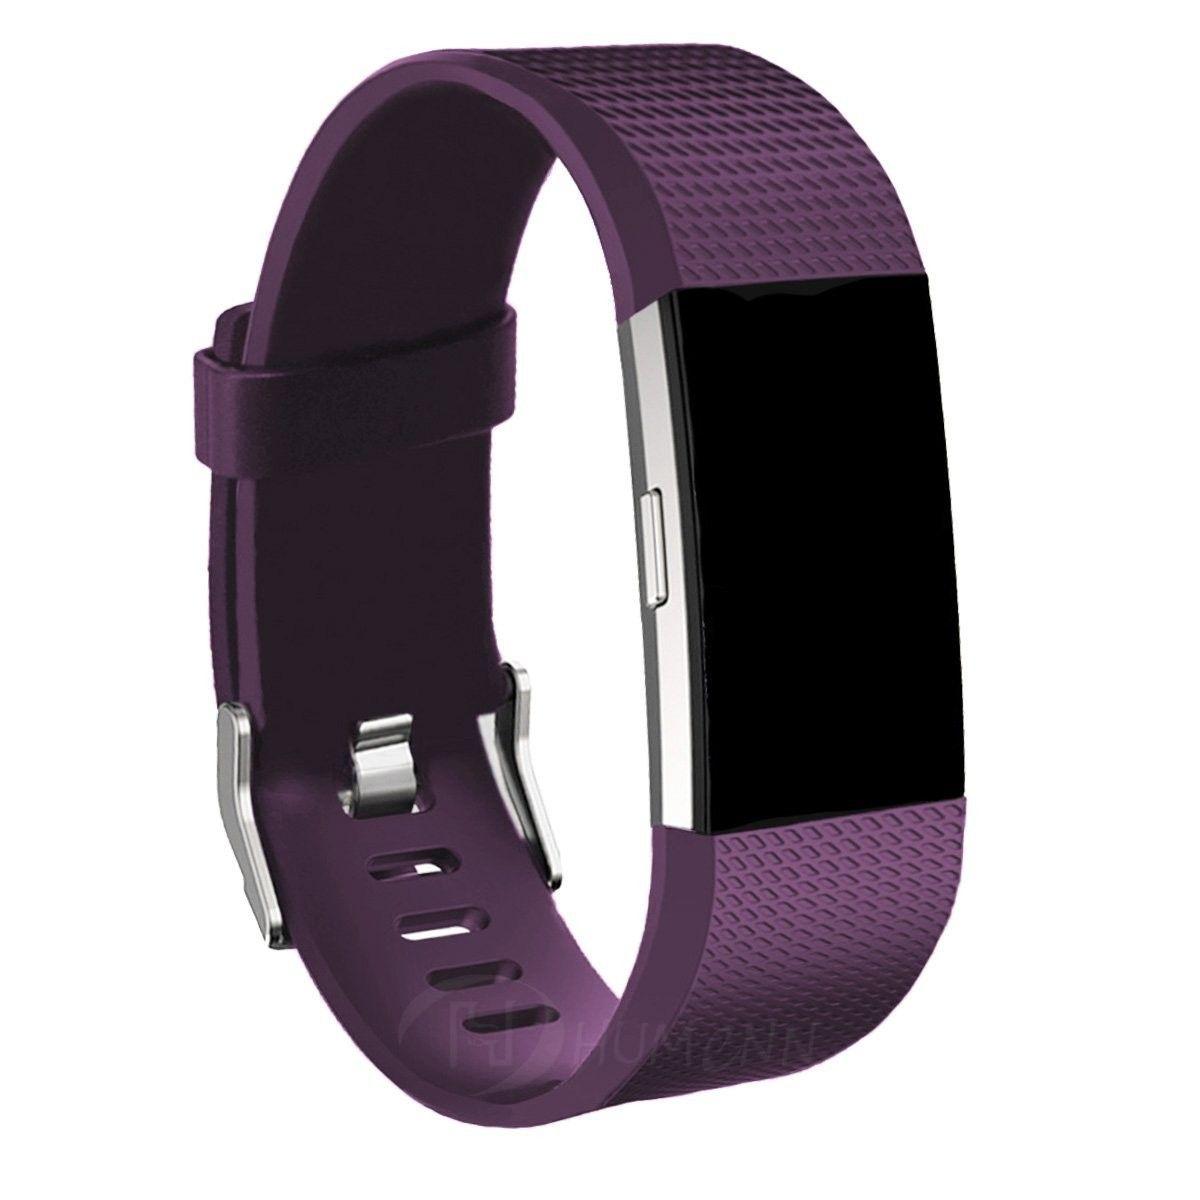 Best Replacement Bands for Fitbit Charge 2